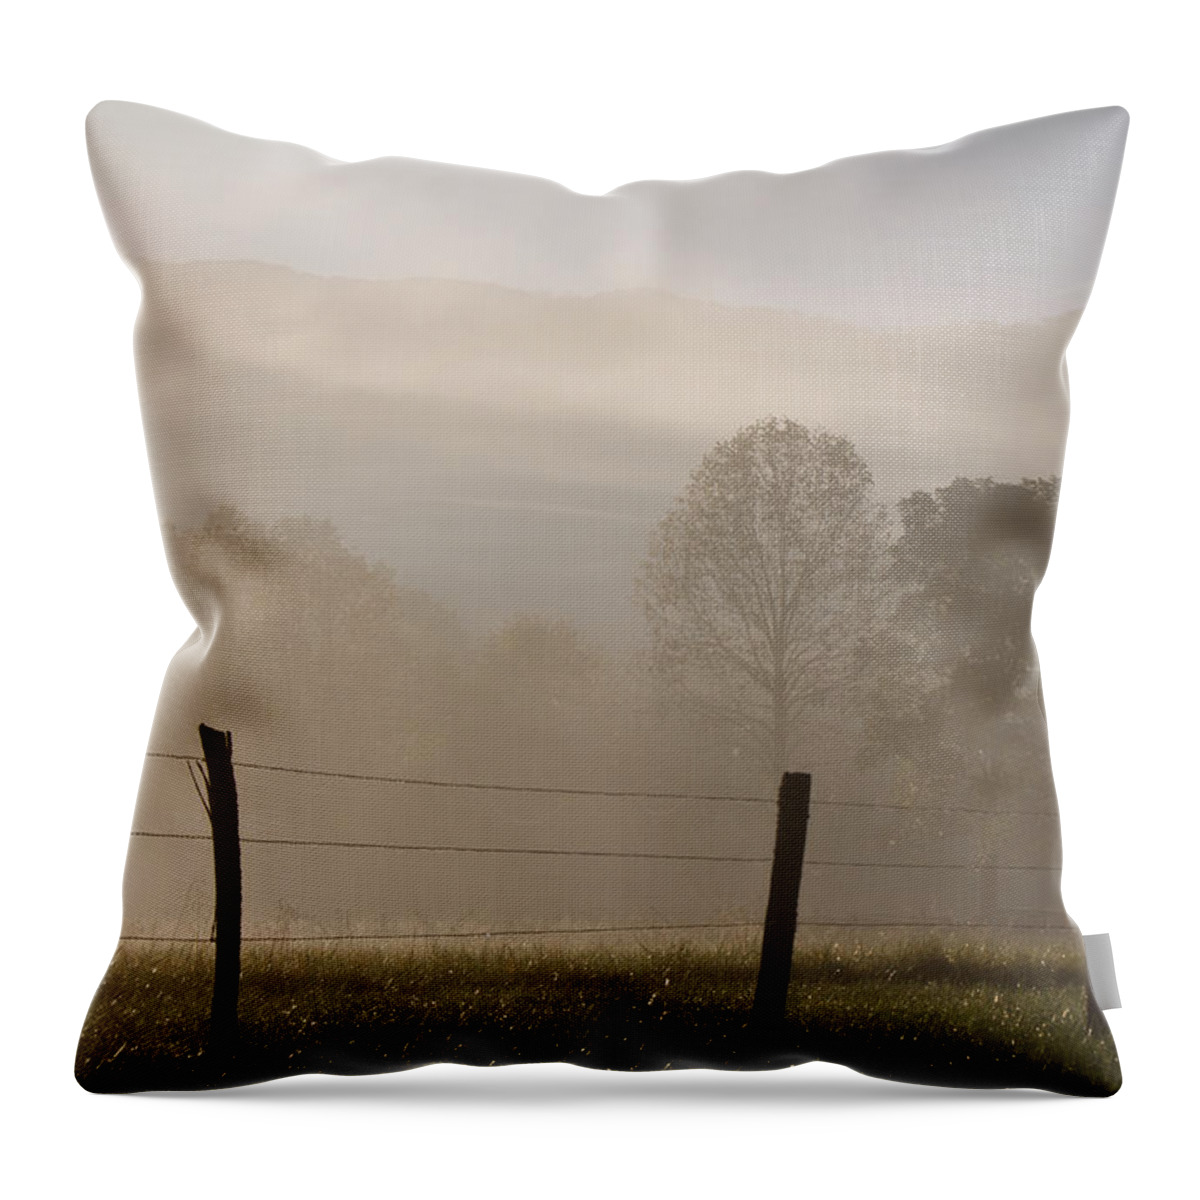 Appalachia Throw Pillow featuring the photograph Morning Sparks by Lana Trussell